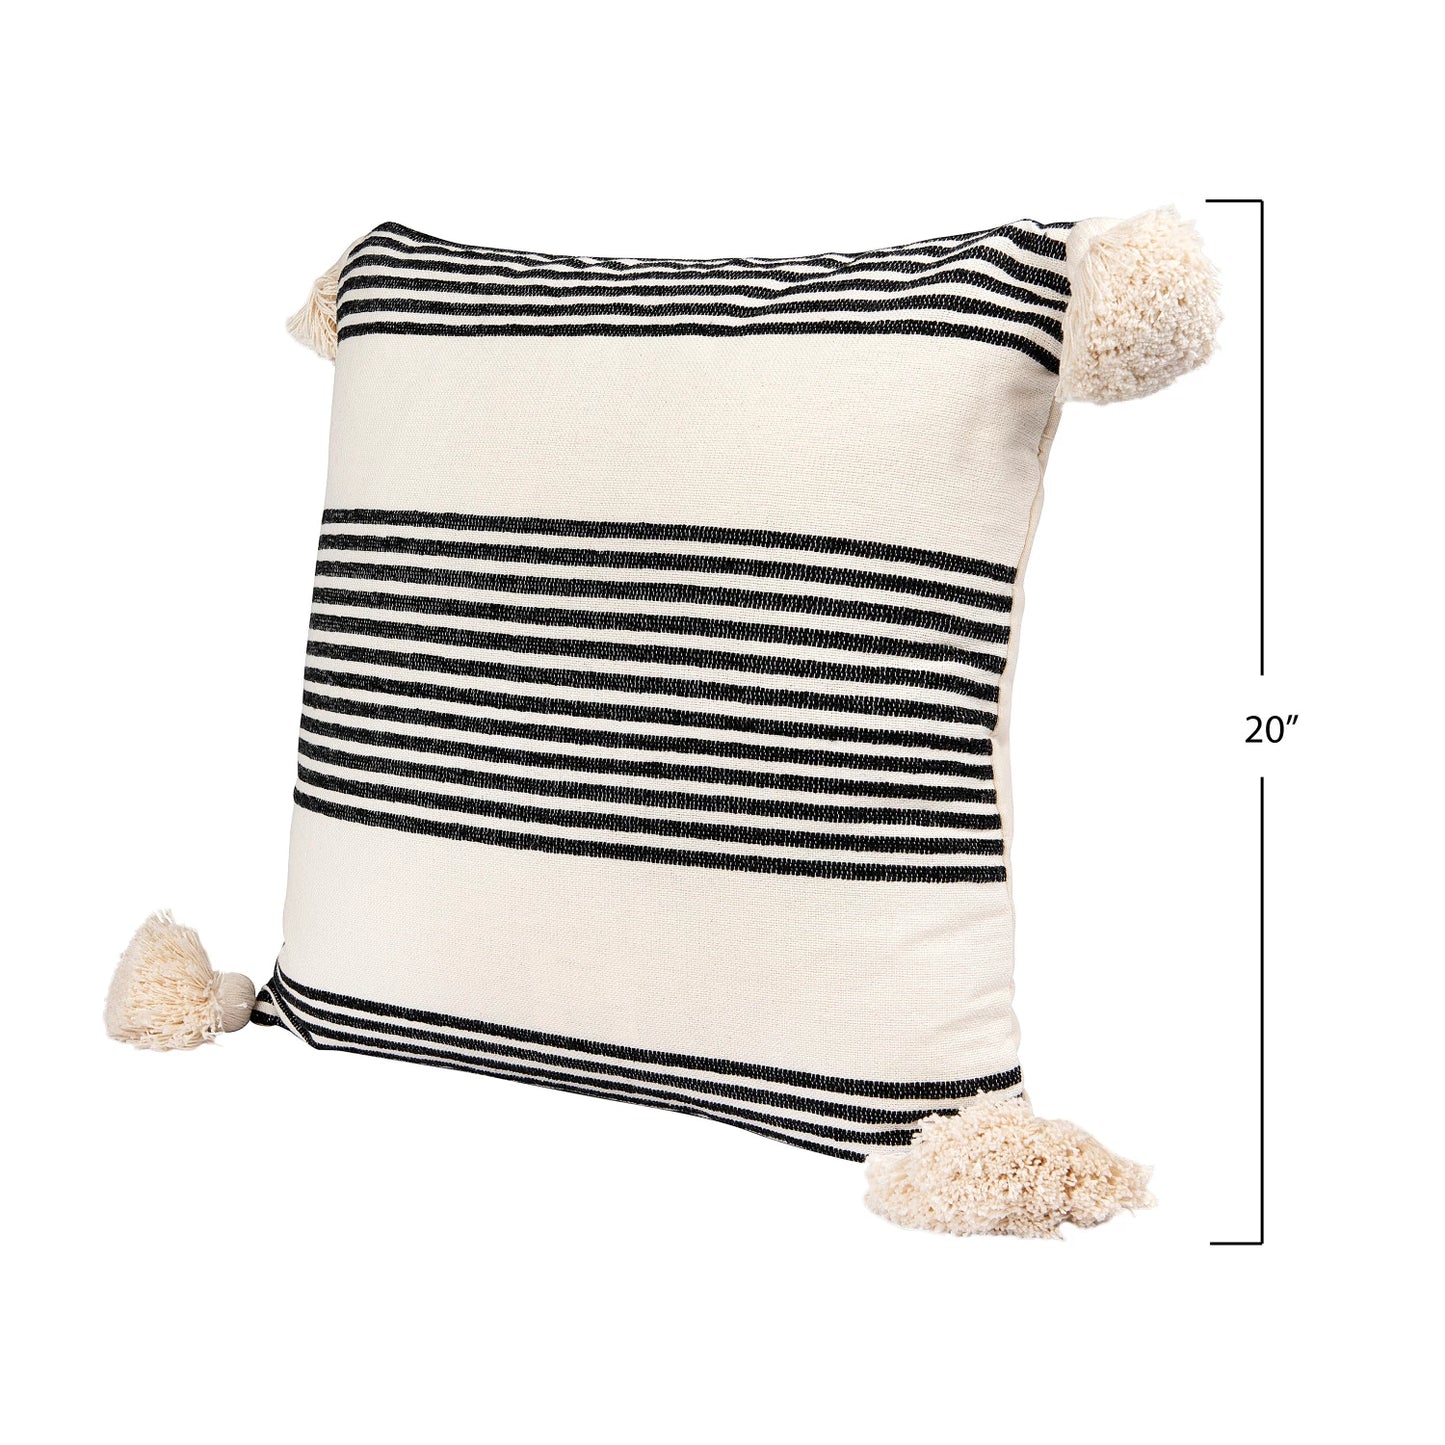 20" Cotton & Chenille Woven Striped Pillow w/ Tassels, Polyester Fill